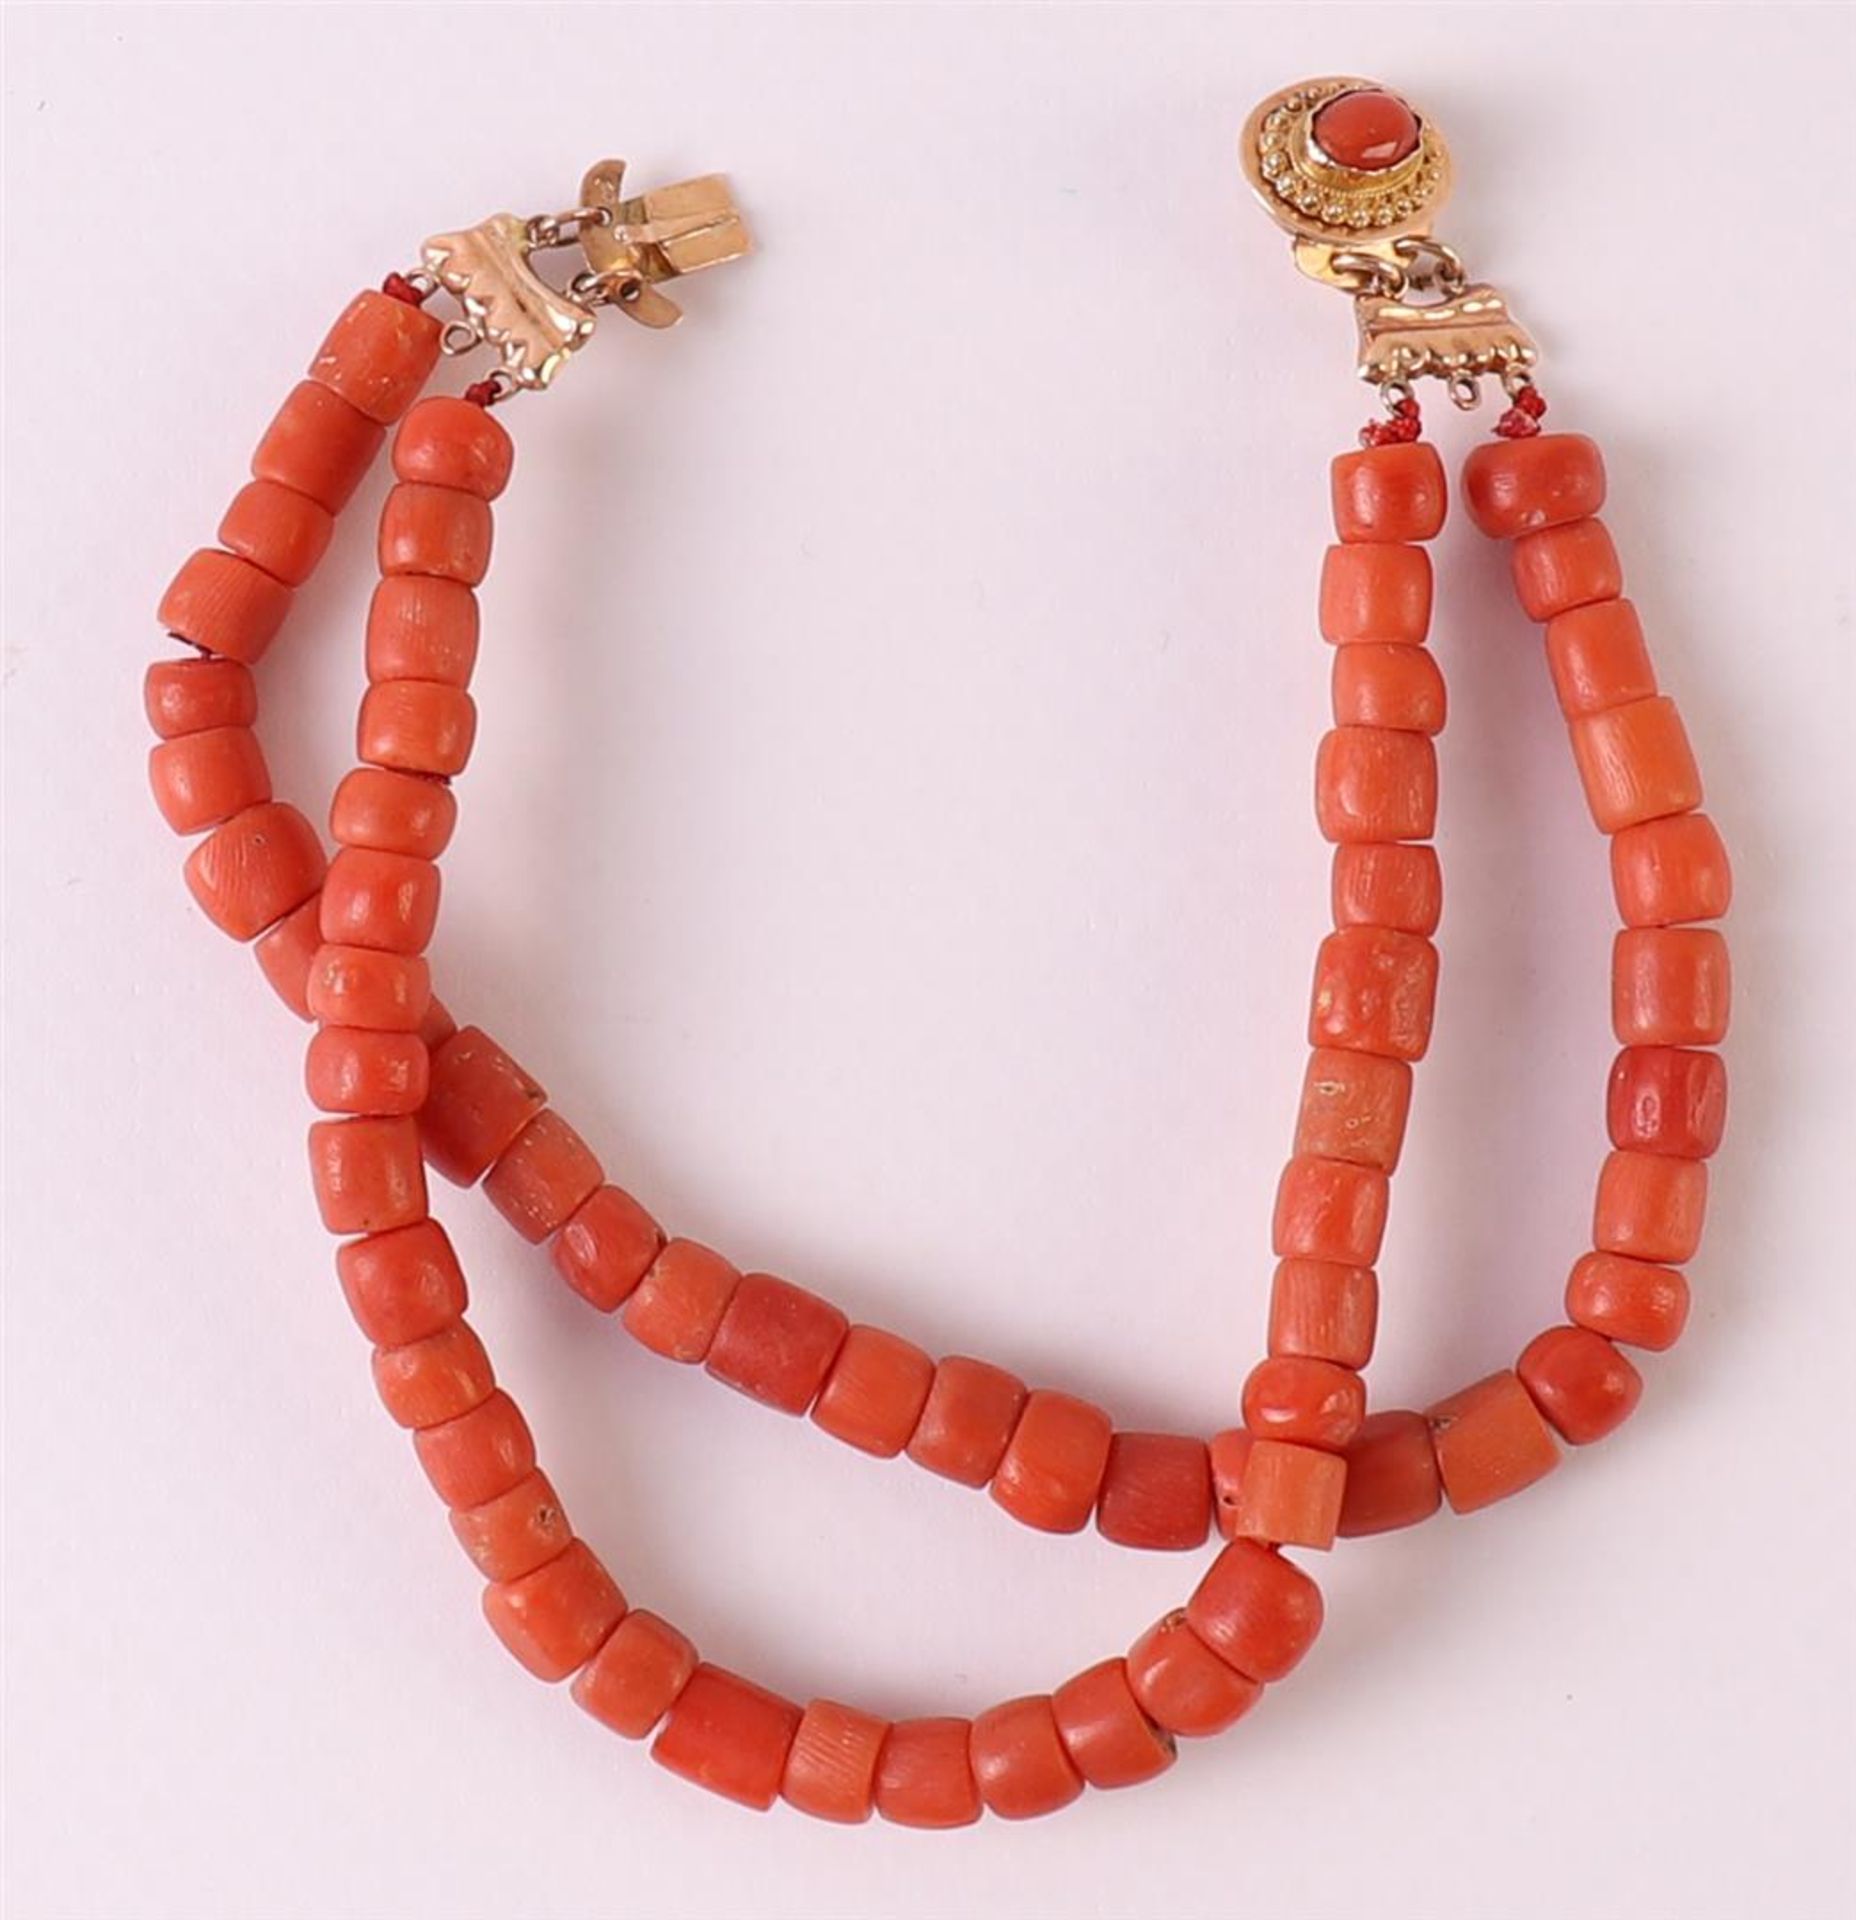 A 2-row bracelet of red coral with a 14 kt 585/1000 gold clasp on which a cabochon cut red coral, - Image 2 of 3